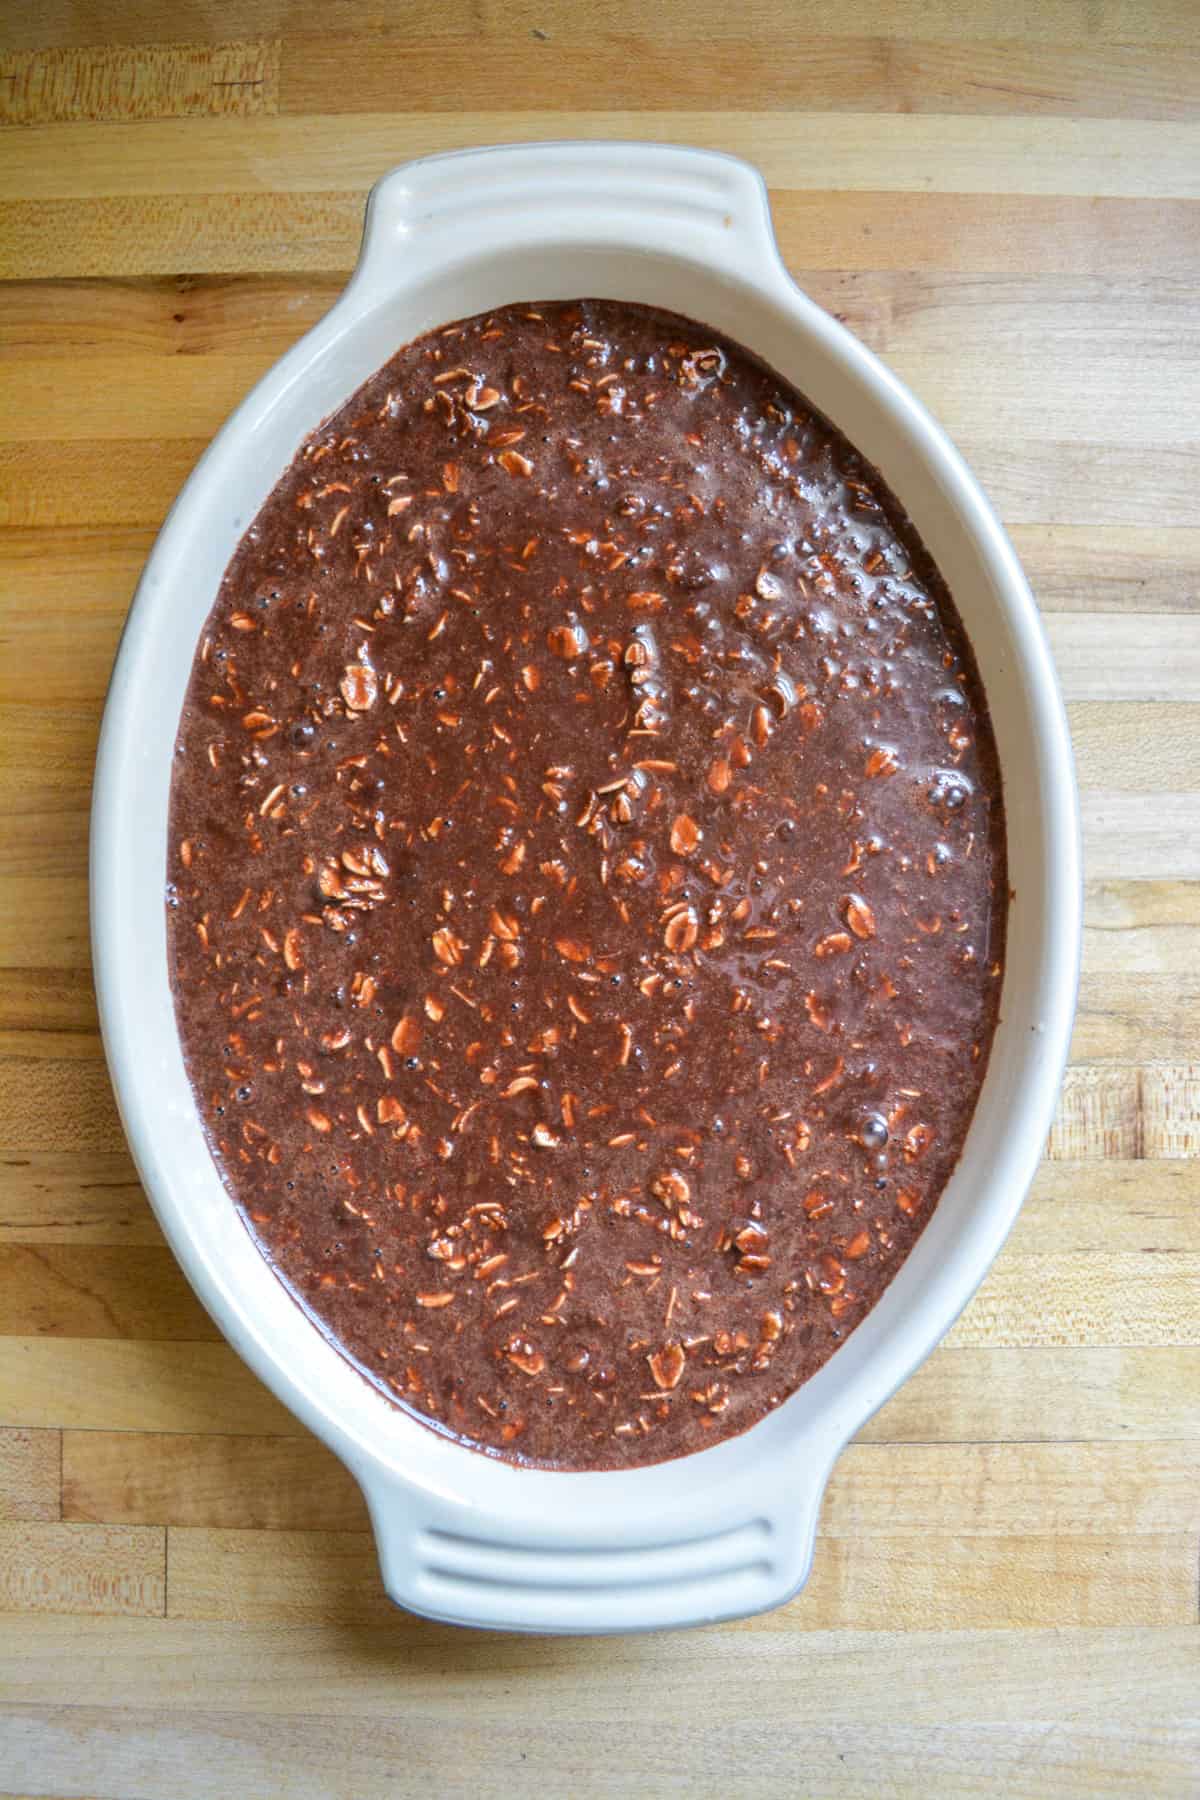 Chocolate oats poured into a baking dish.